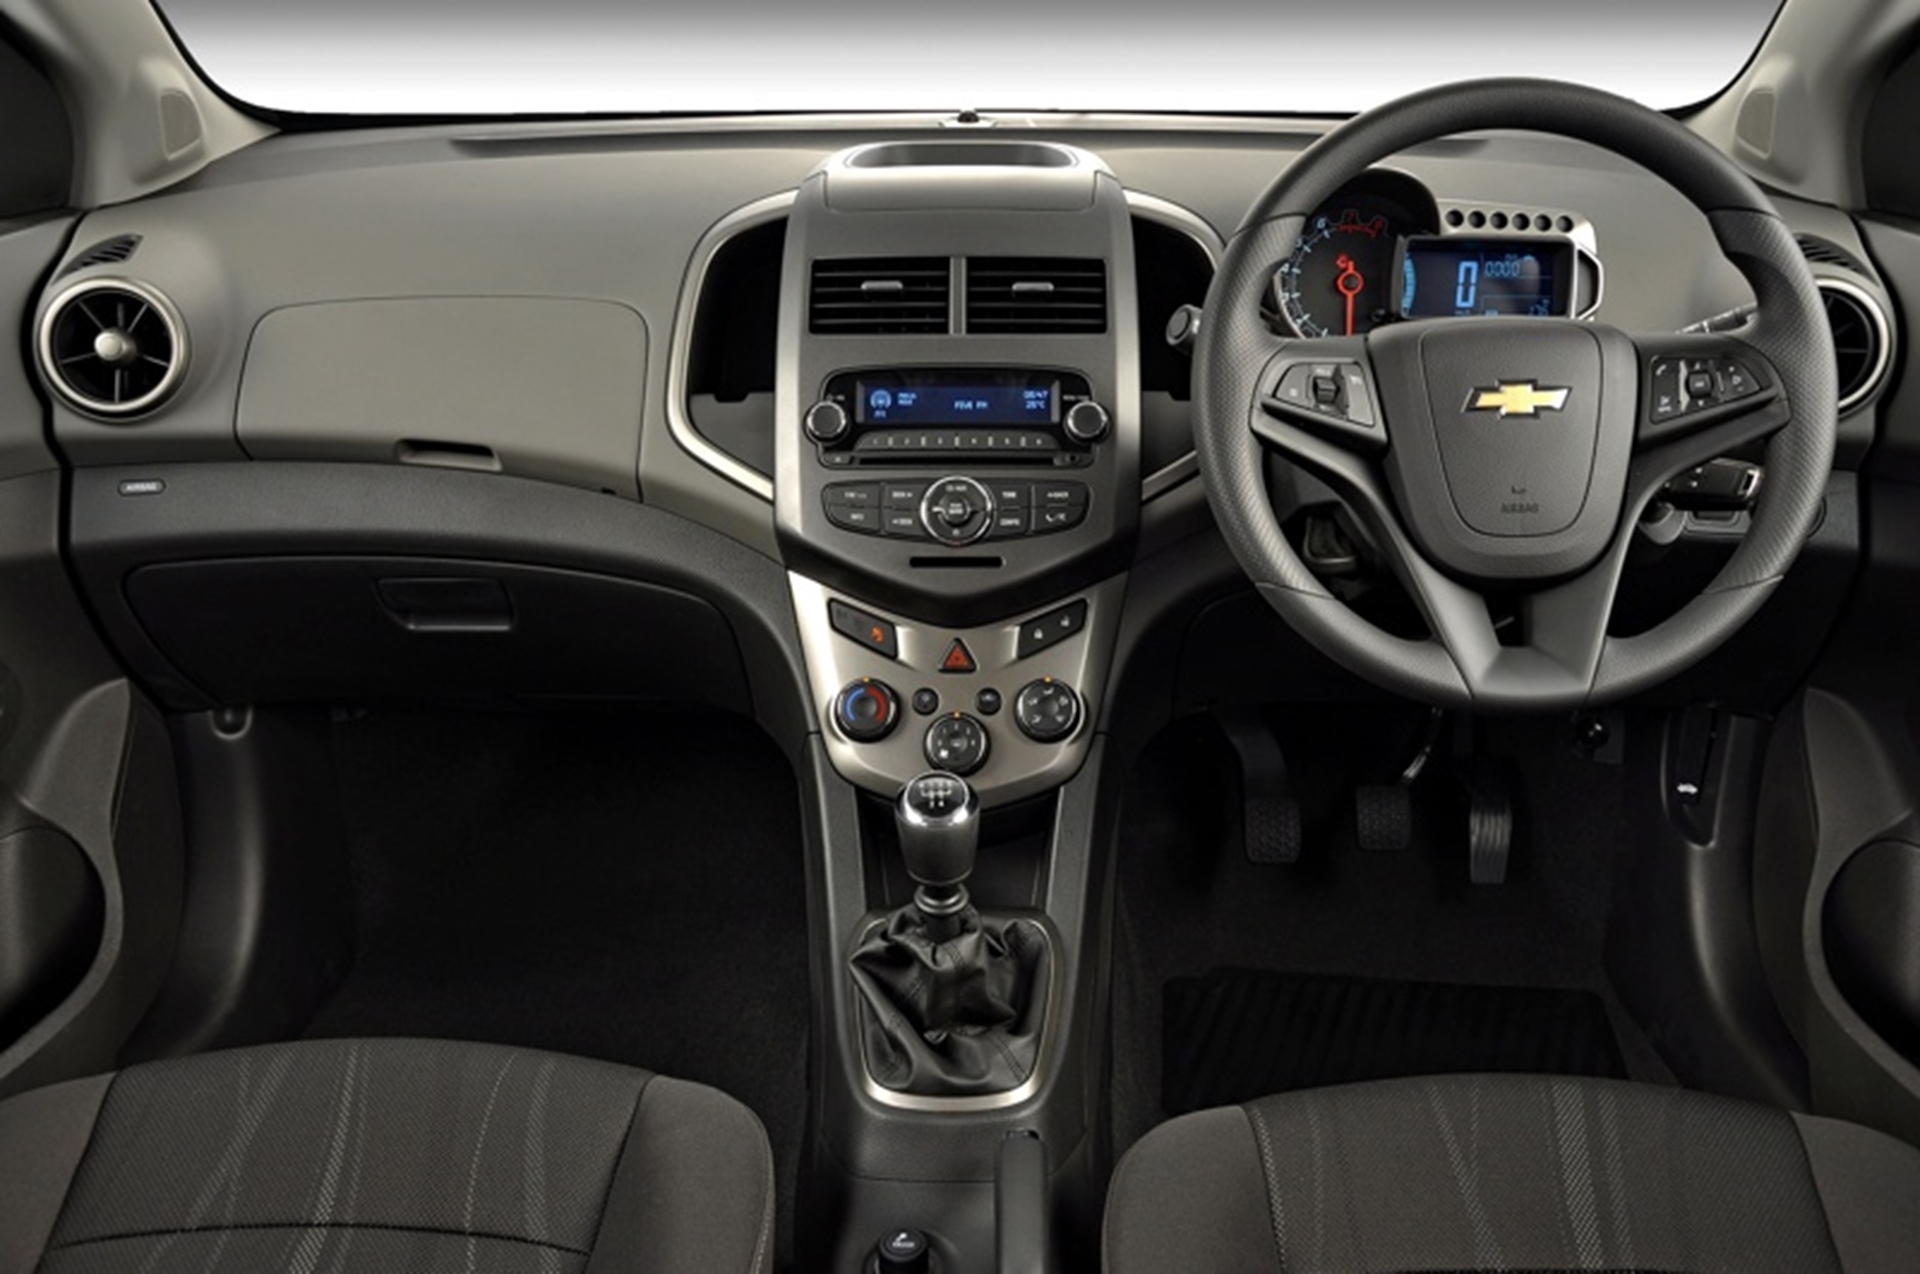 New Chevrolet Sonic designed to be amongst safest vehicles in small car segment